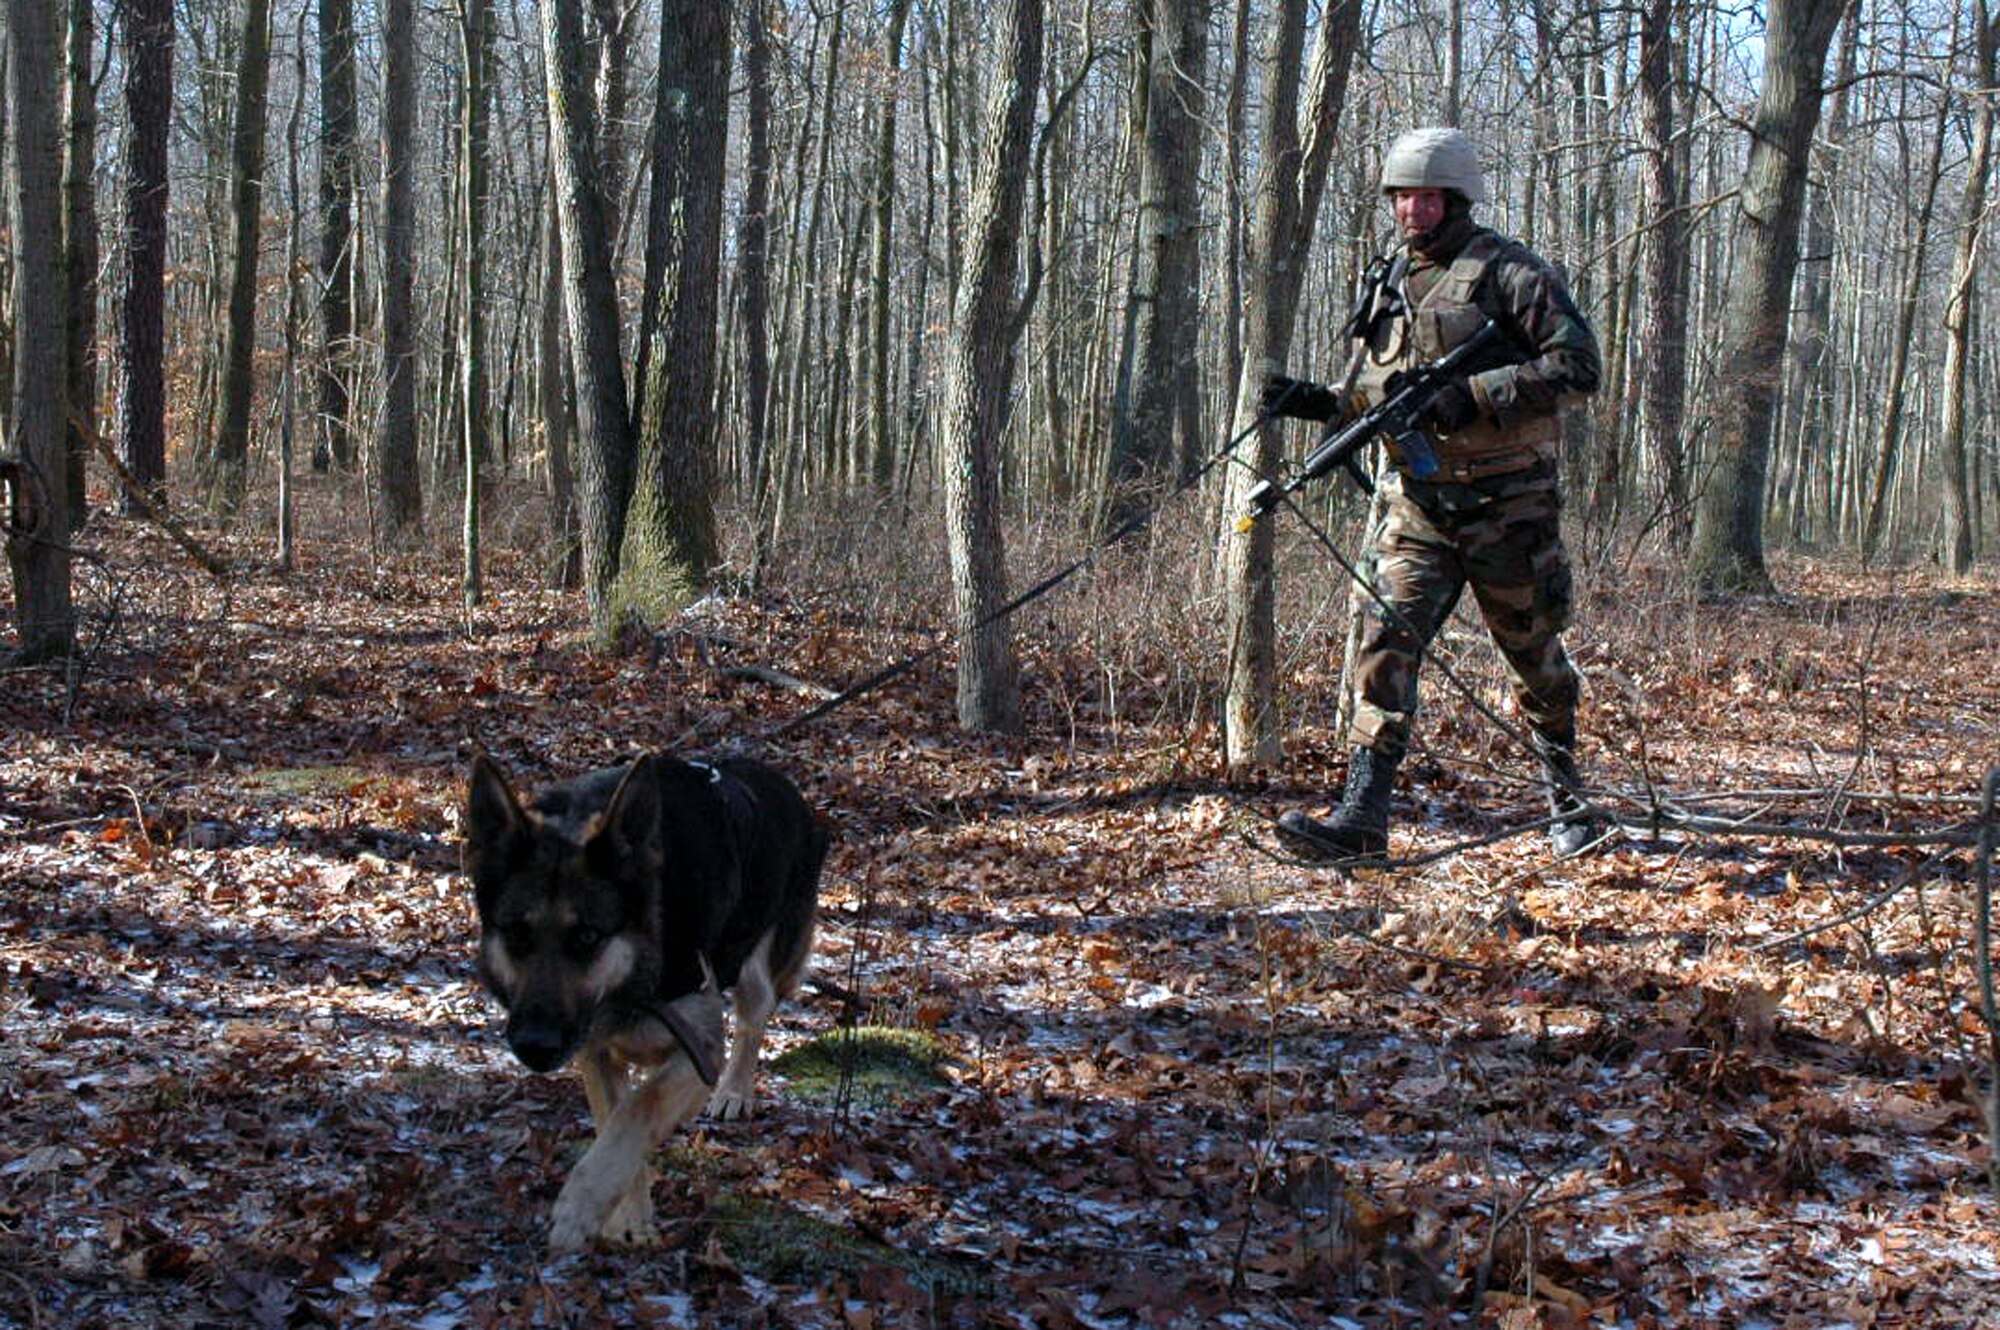 Staff Sgt. Christopher Dion and his military working dog Dena participate in an obstacle course on a range on Fort Dix, N.J., Feb. 14 as part of training as students in the Air Force Phoenix Warrior Course 08-3 K-9 track.  The course is taught by the U.S. Air Force Expeditionary Center's Expeditionary Operations School and 421st Combat Training Squadron and prepares security forces for upcoming deployments.  Sergeant Dion and Dena are from the 6th Security Forces Squadron at MacDill Air Force Base, Fla.  (U.S. Air Force Photo/Tech. Sgt. Scott T. Sturkol)